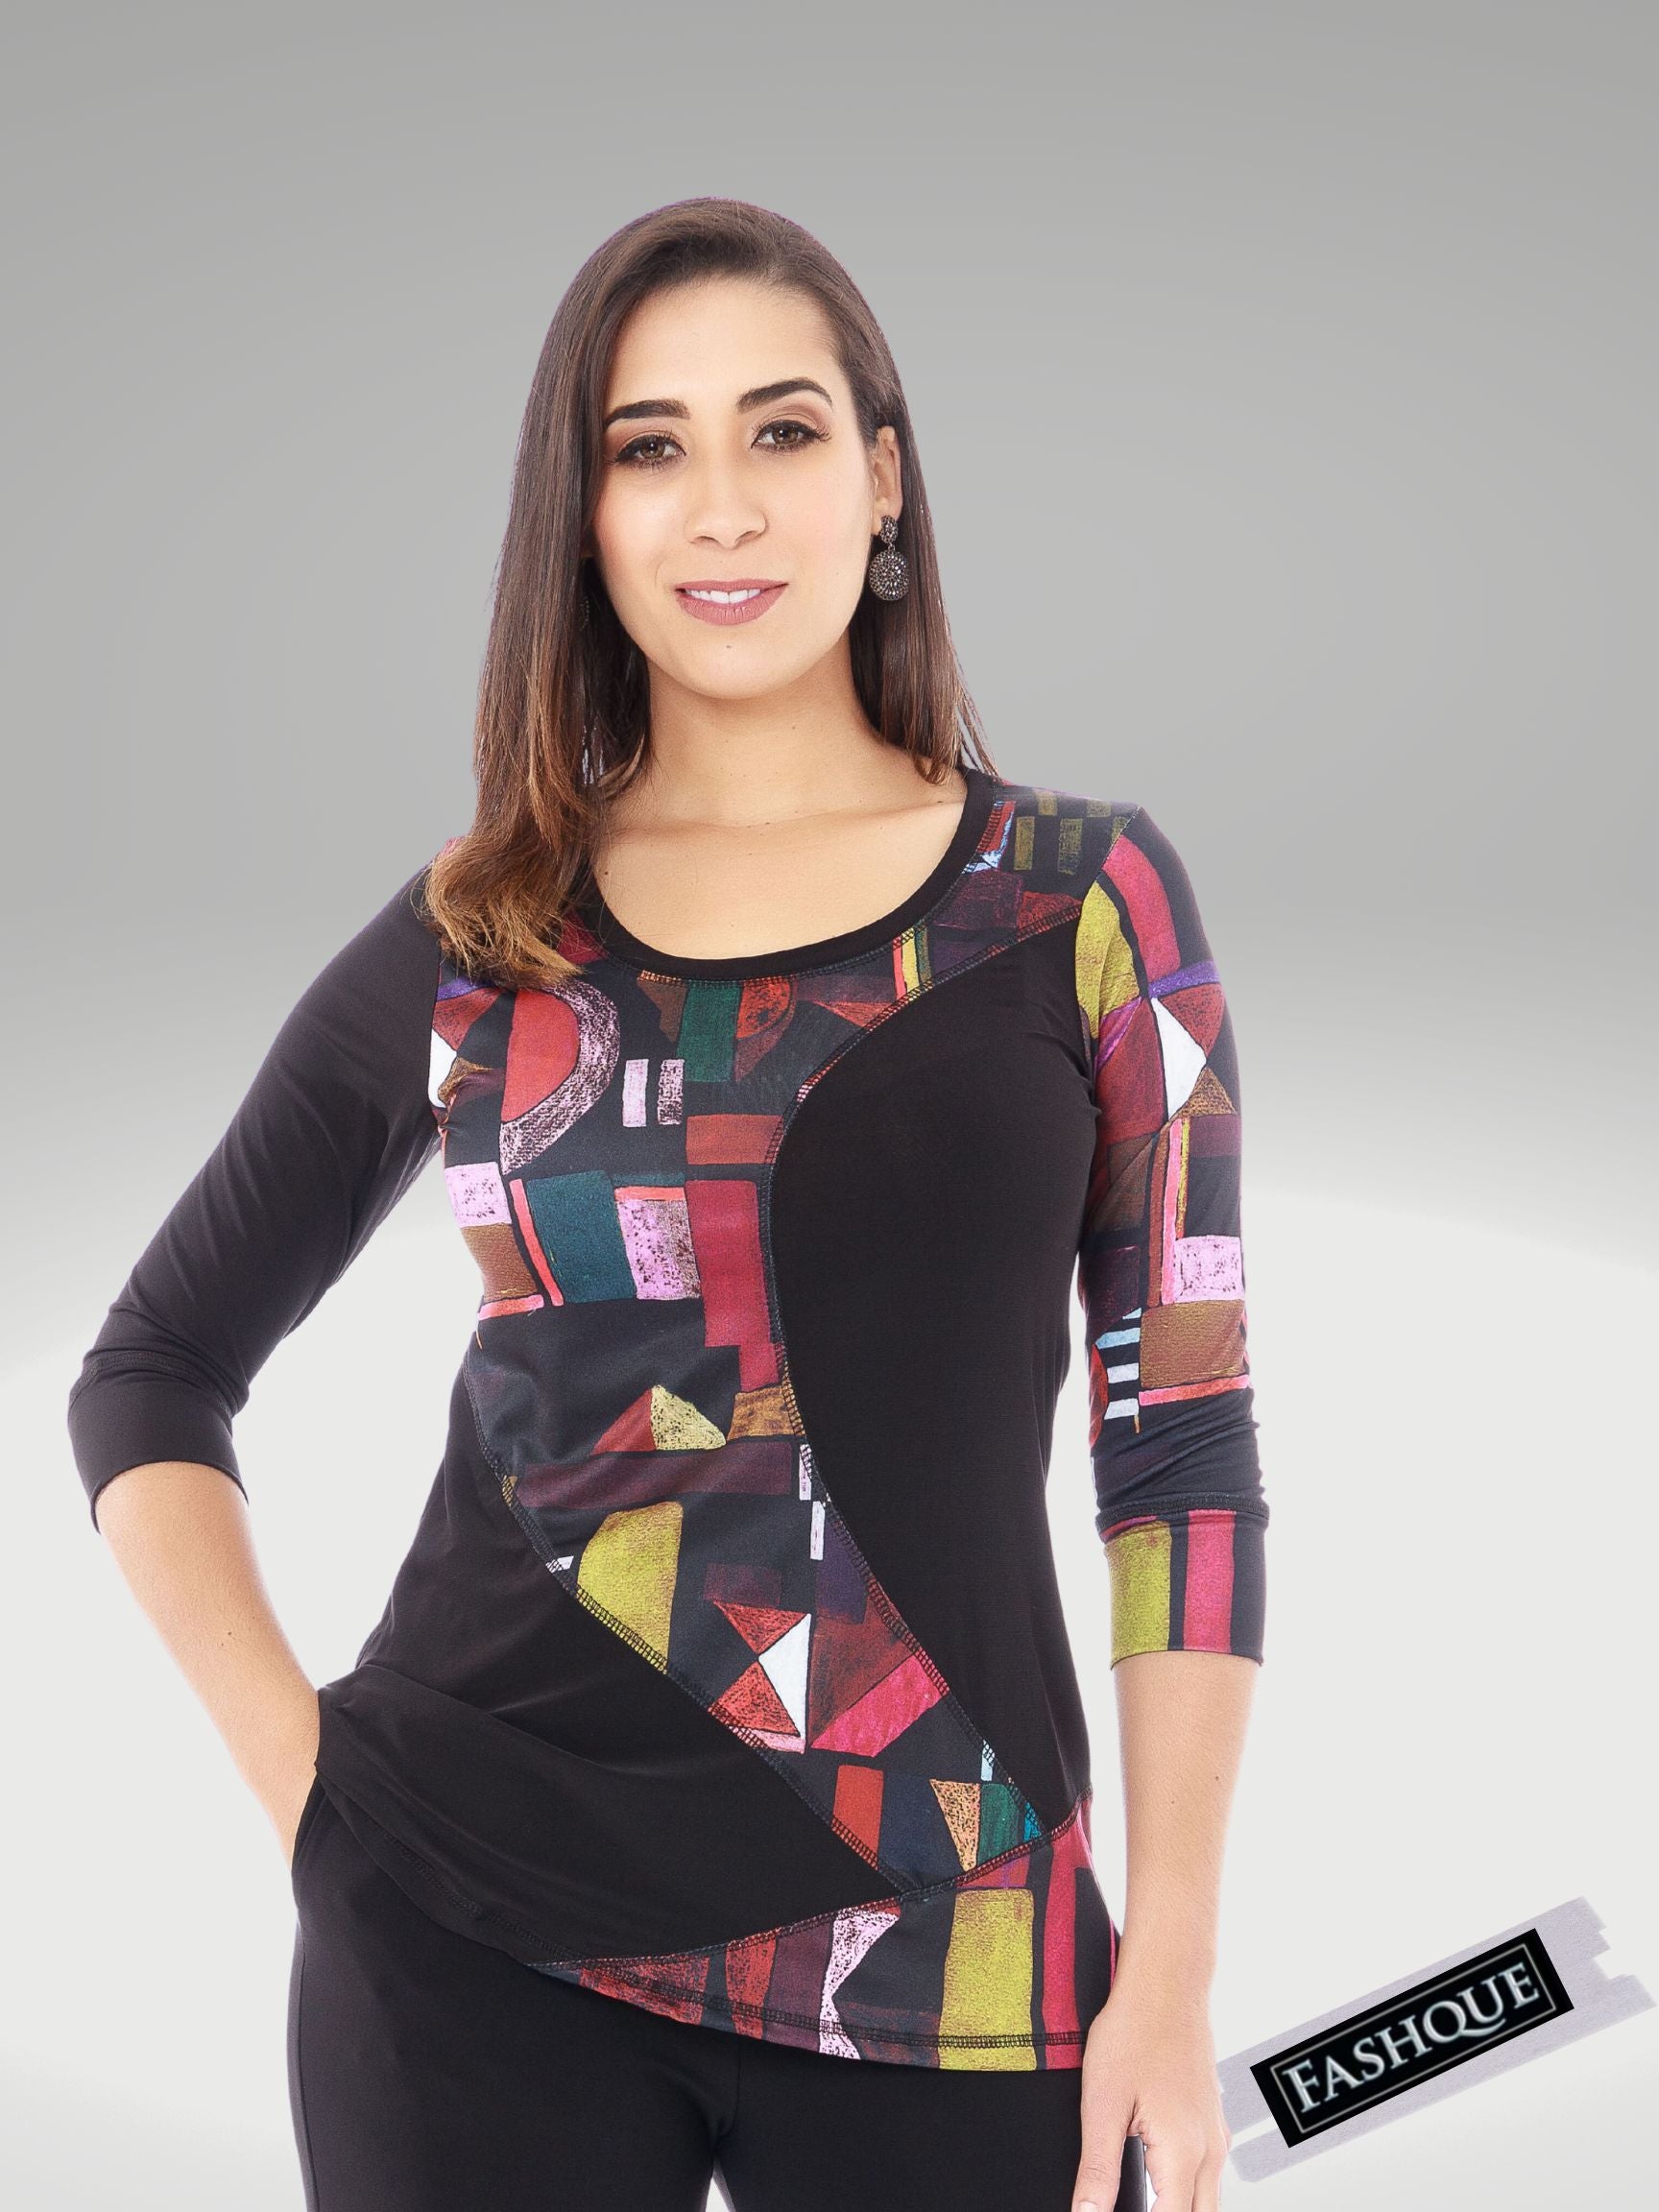 FASHQUE - Color Block Plain and Print Combo Scoop Neck 3/4 Sleeve Tunic - T532